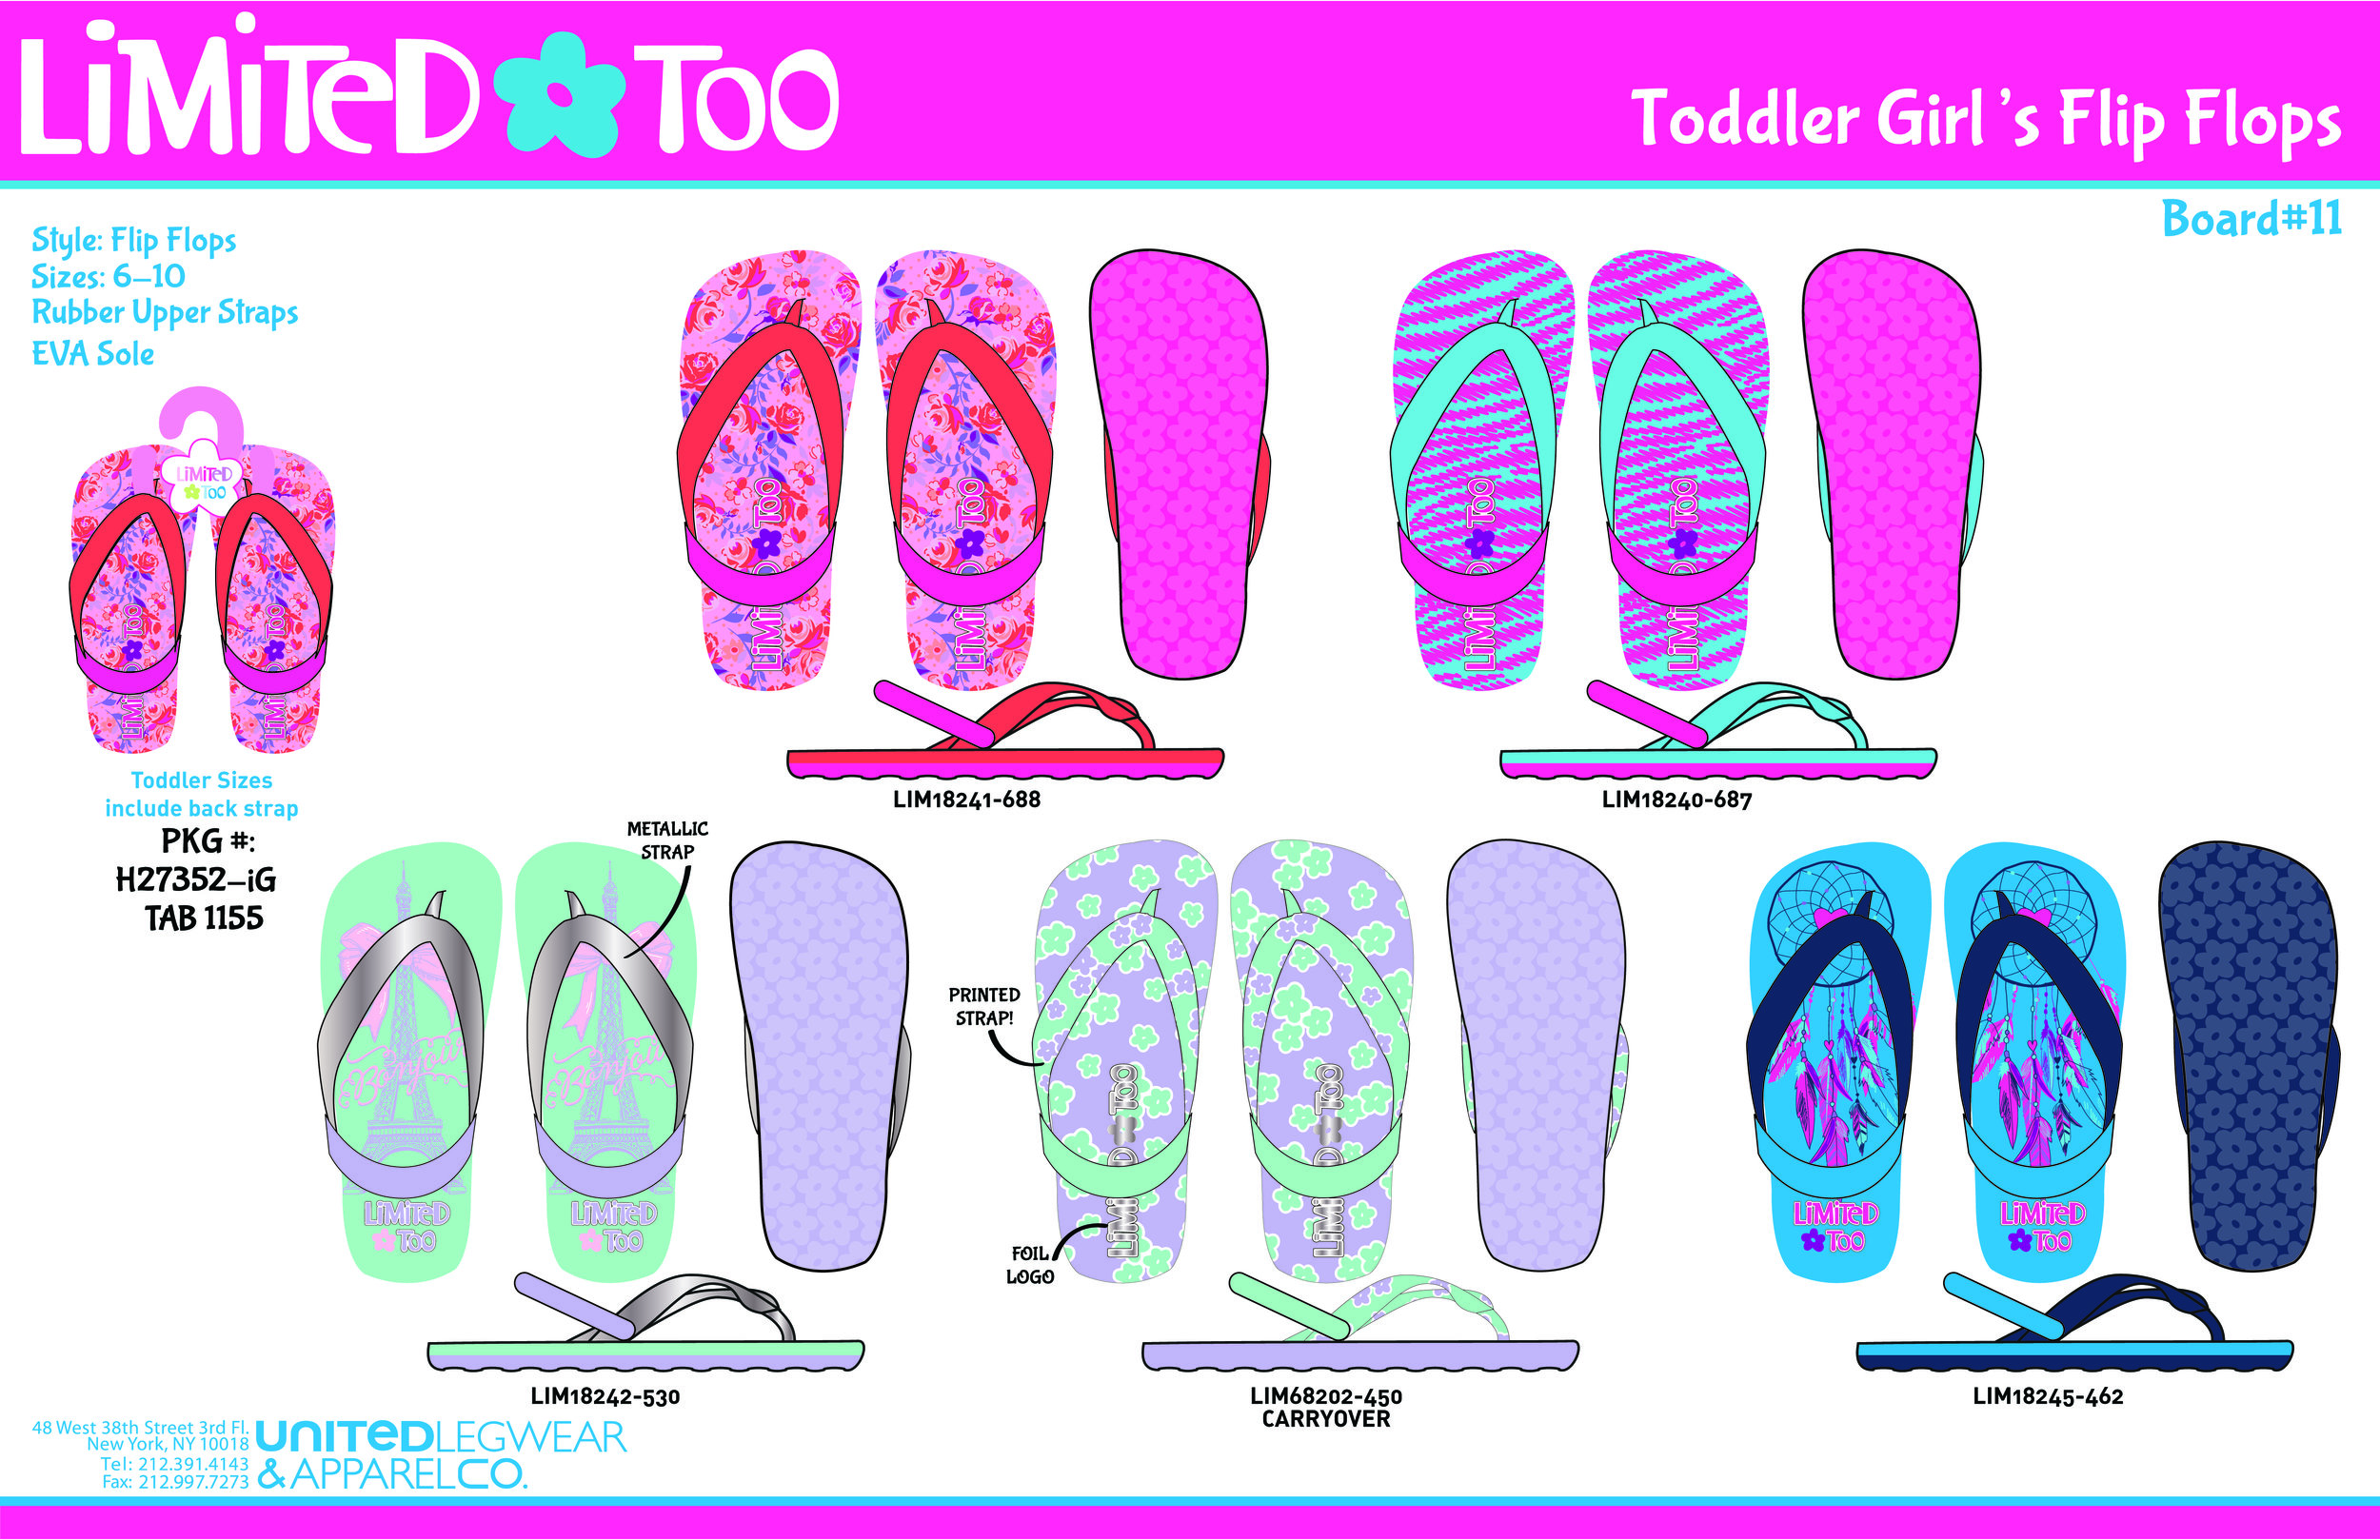 BOARD011- Limited Too Toddlers Flip Flops-SS17-01.jpg